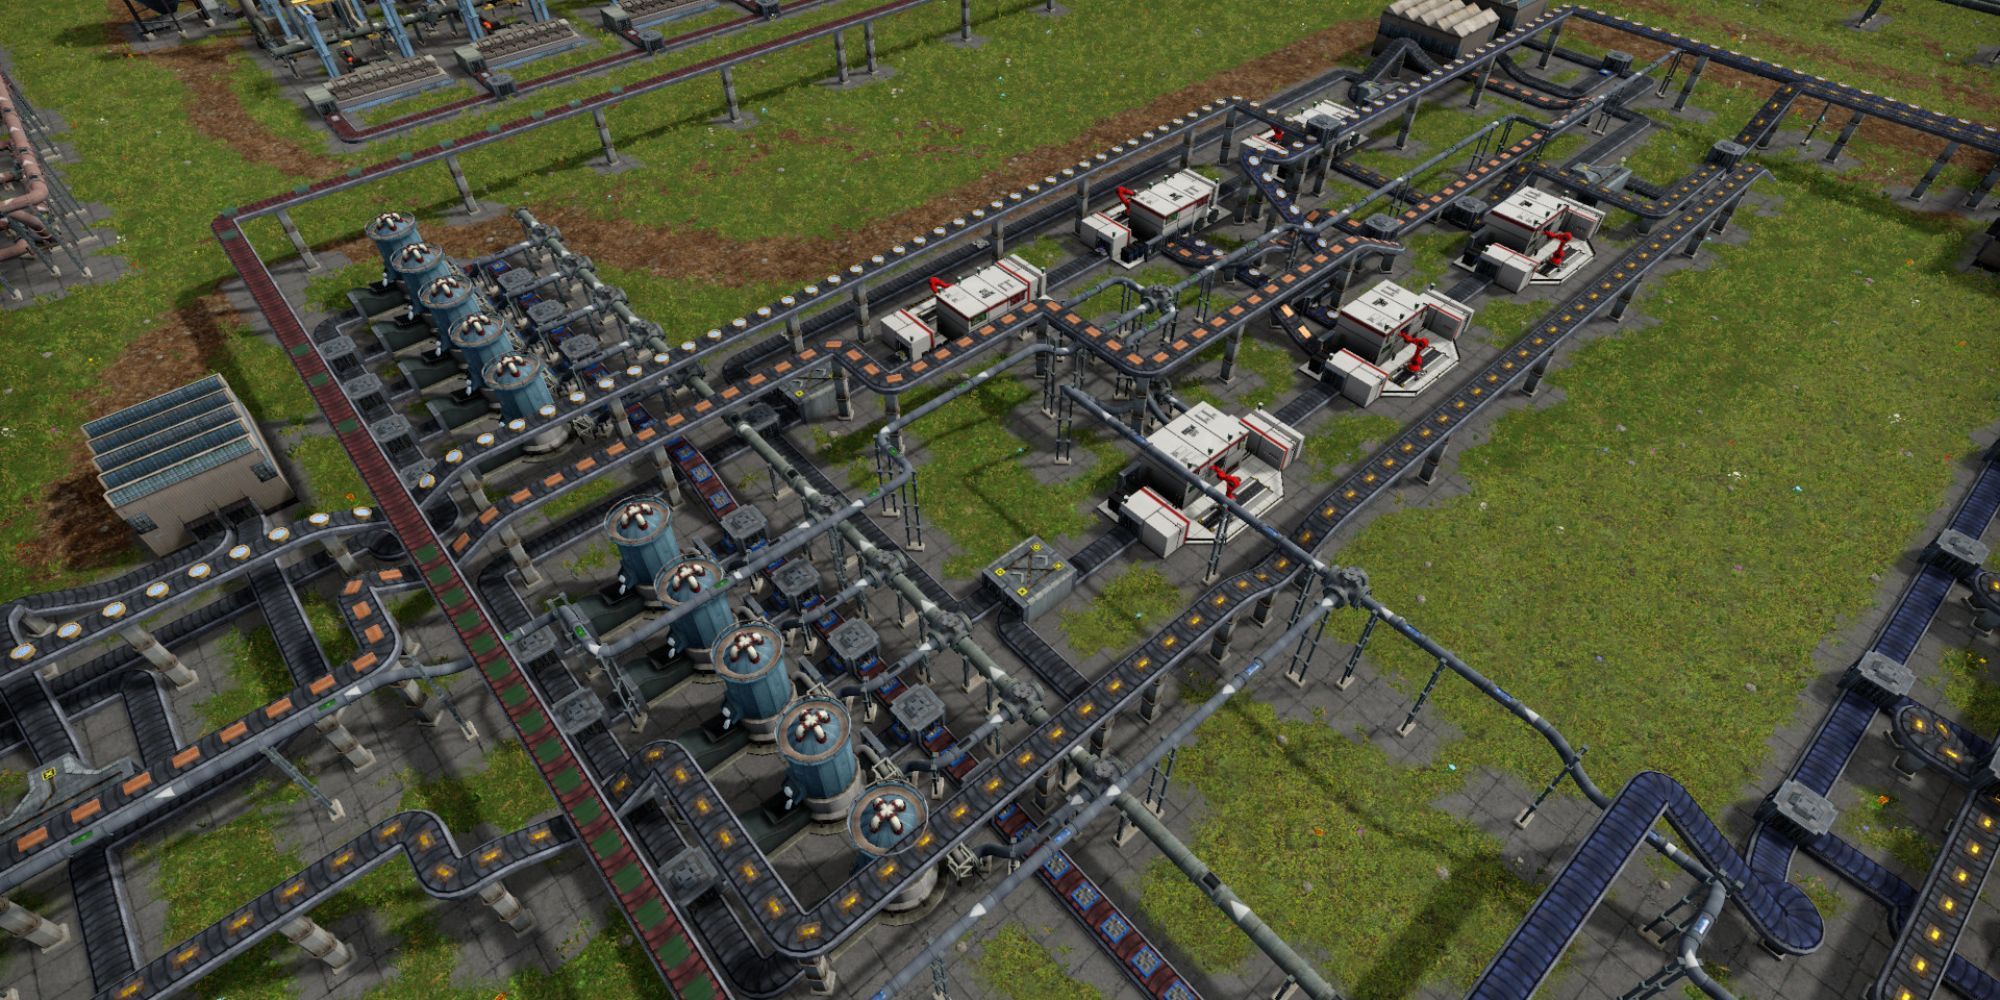 A variety of conveyor belts and machines in Captain of Industry